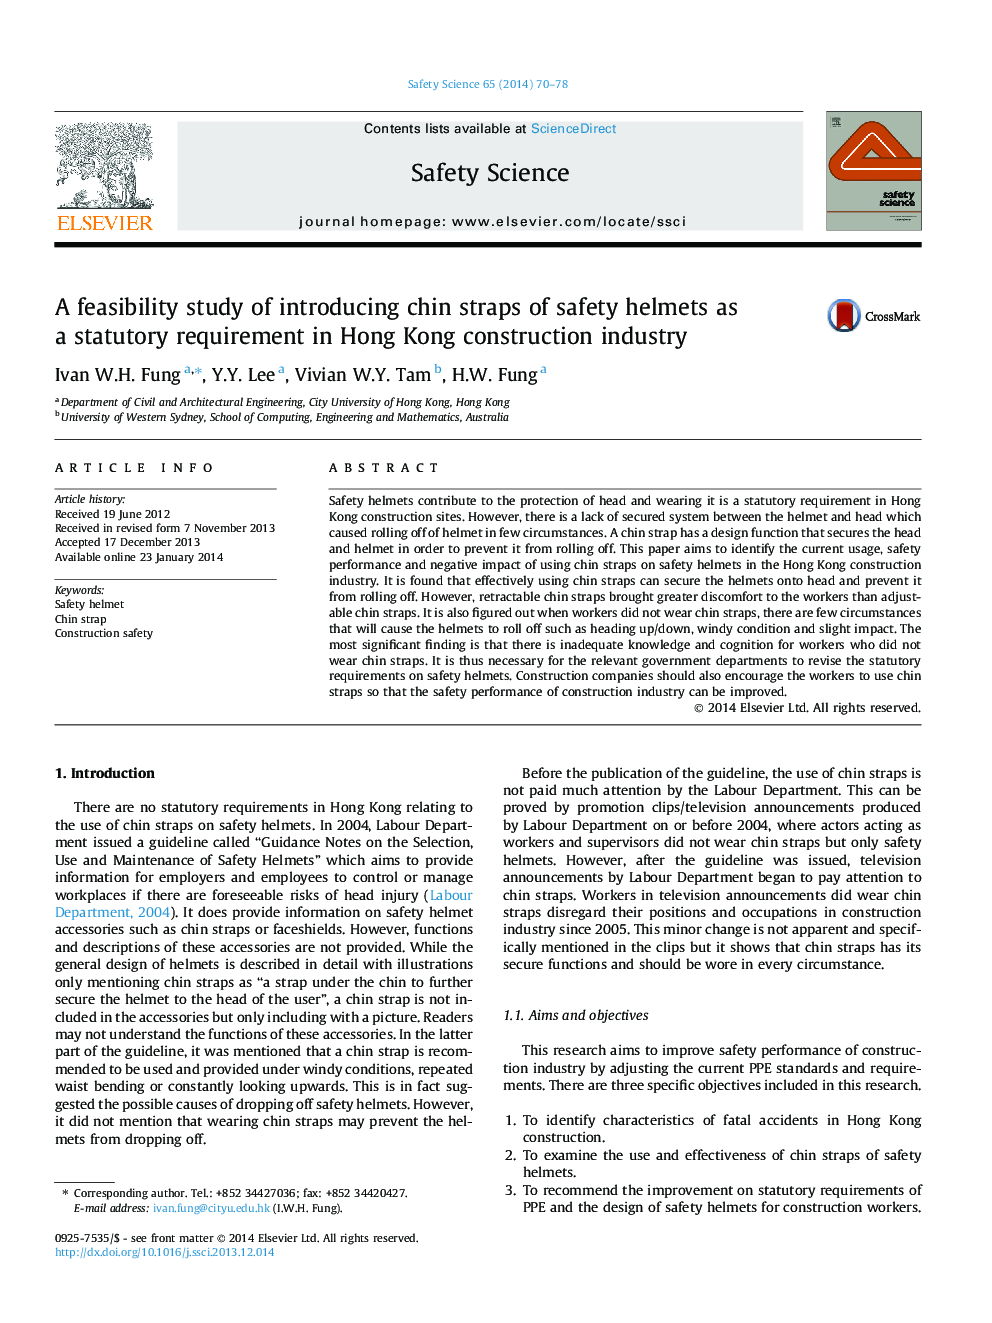 A feasibility study of introducing chin straps of safety helmets as a statutory requirement in Hong Kong construction industry